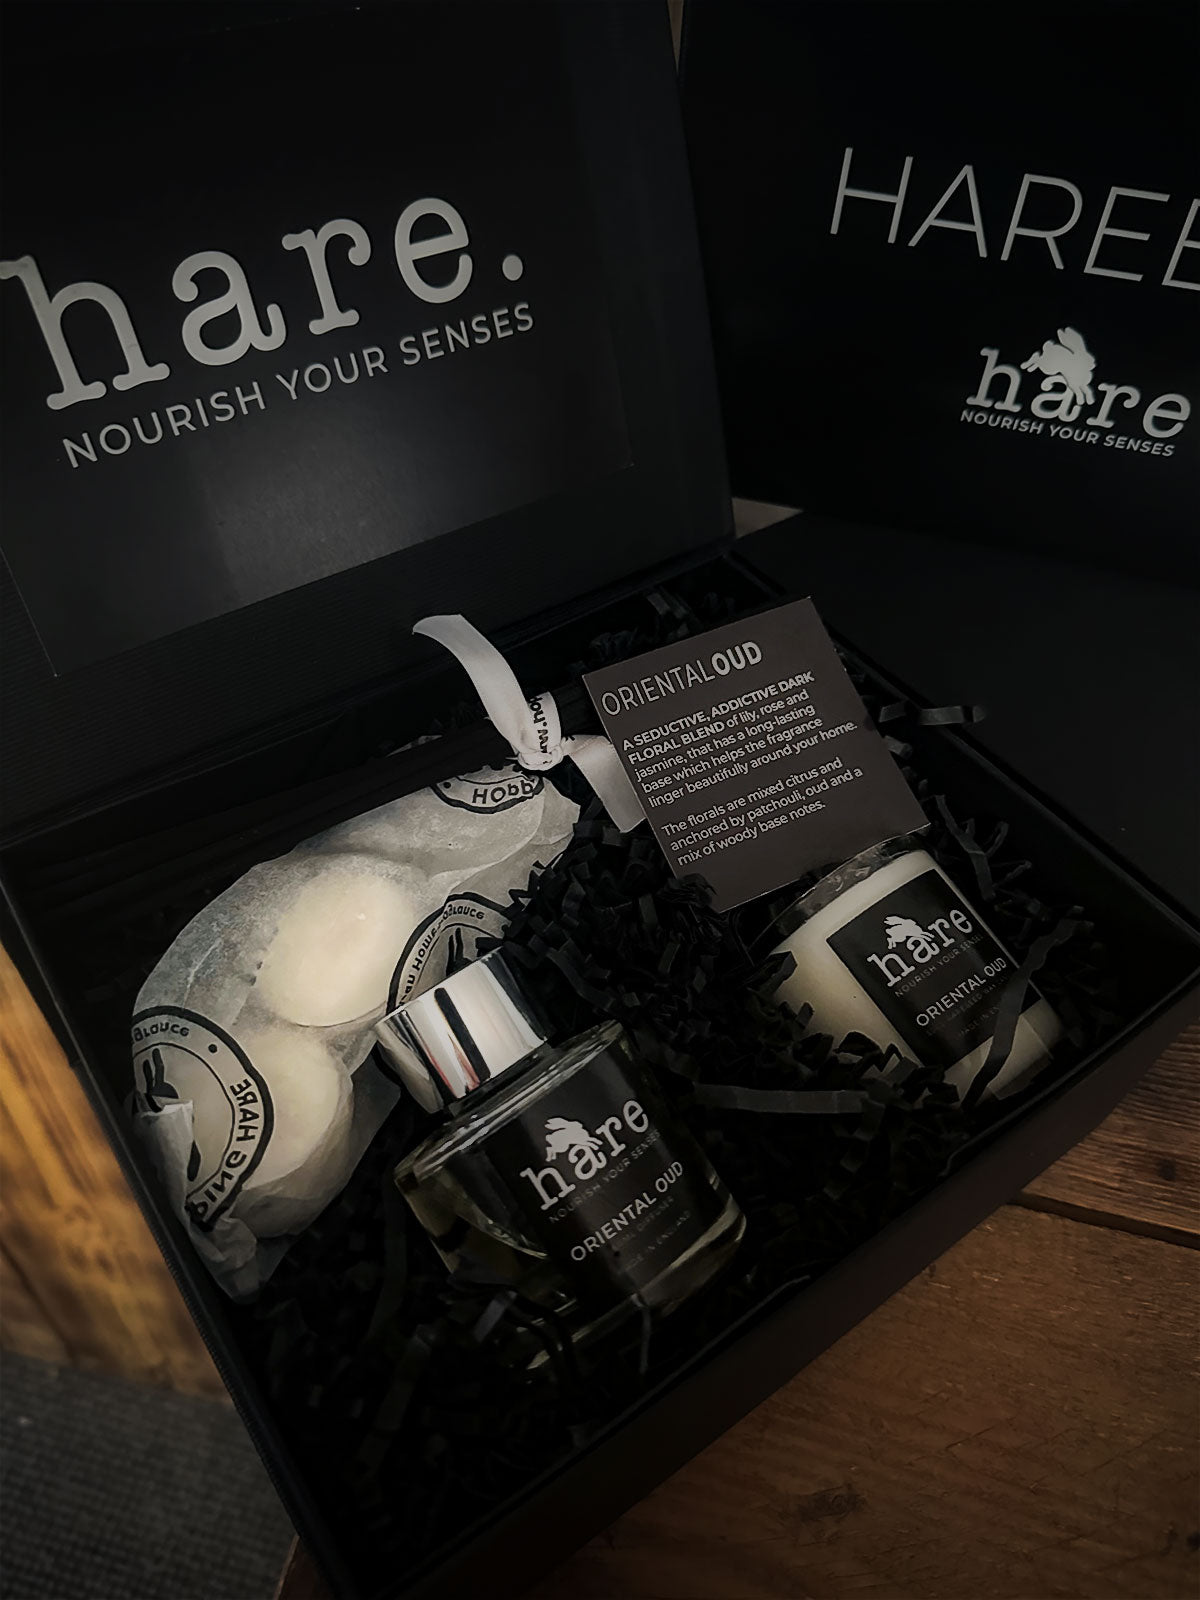 6 Months Subscription to Harebox